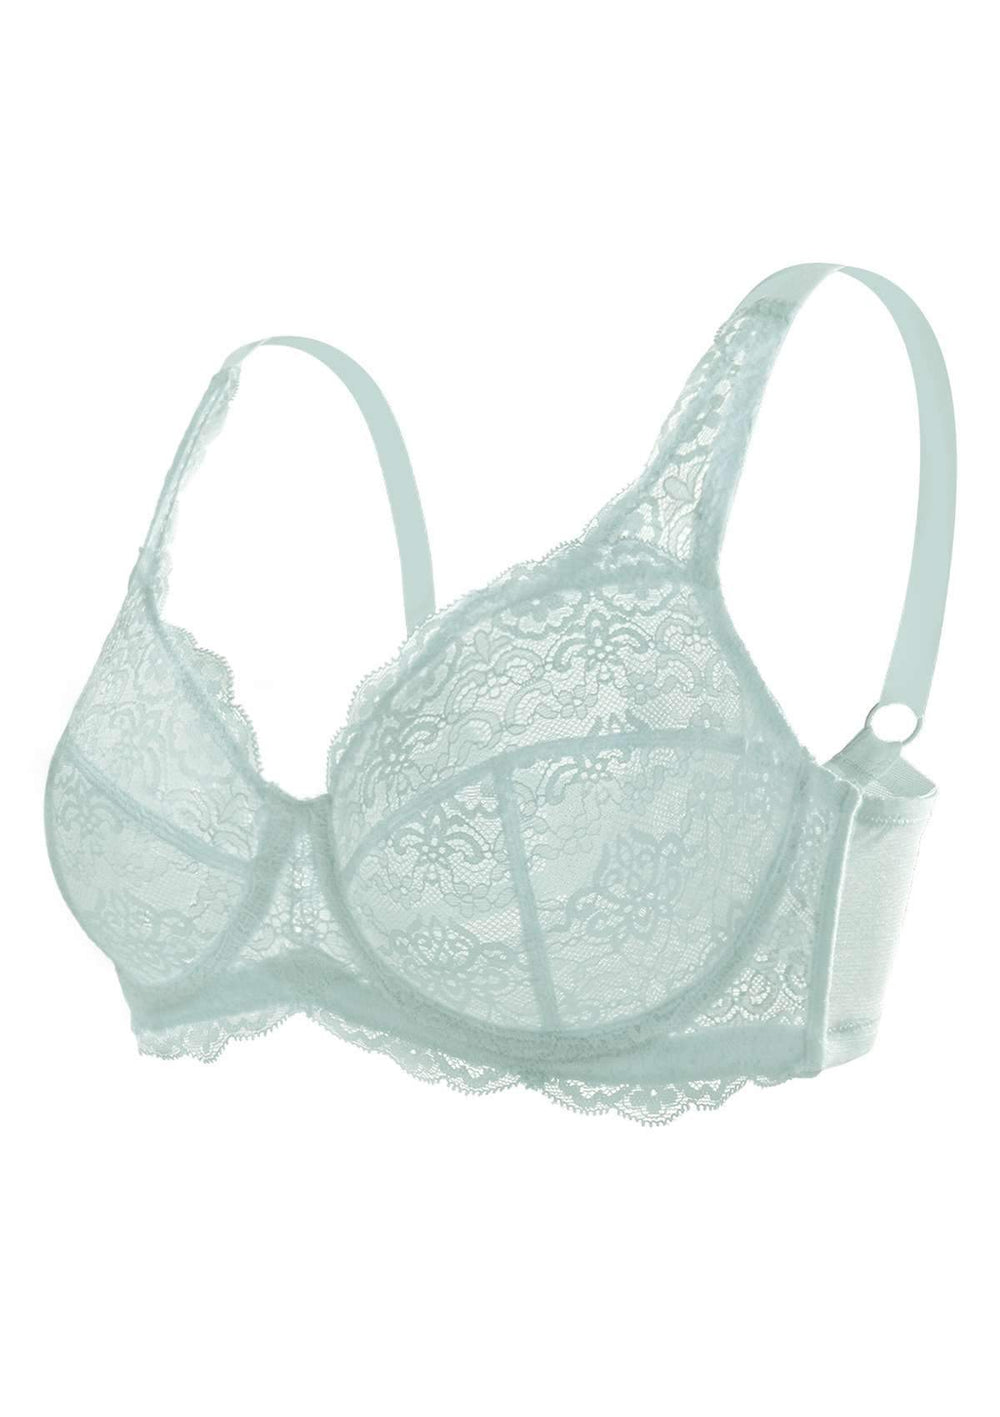 Lace Bra Floral White Underwired Non-Padded Full Cup Floral Brand New